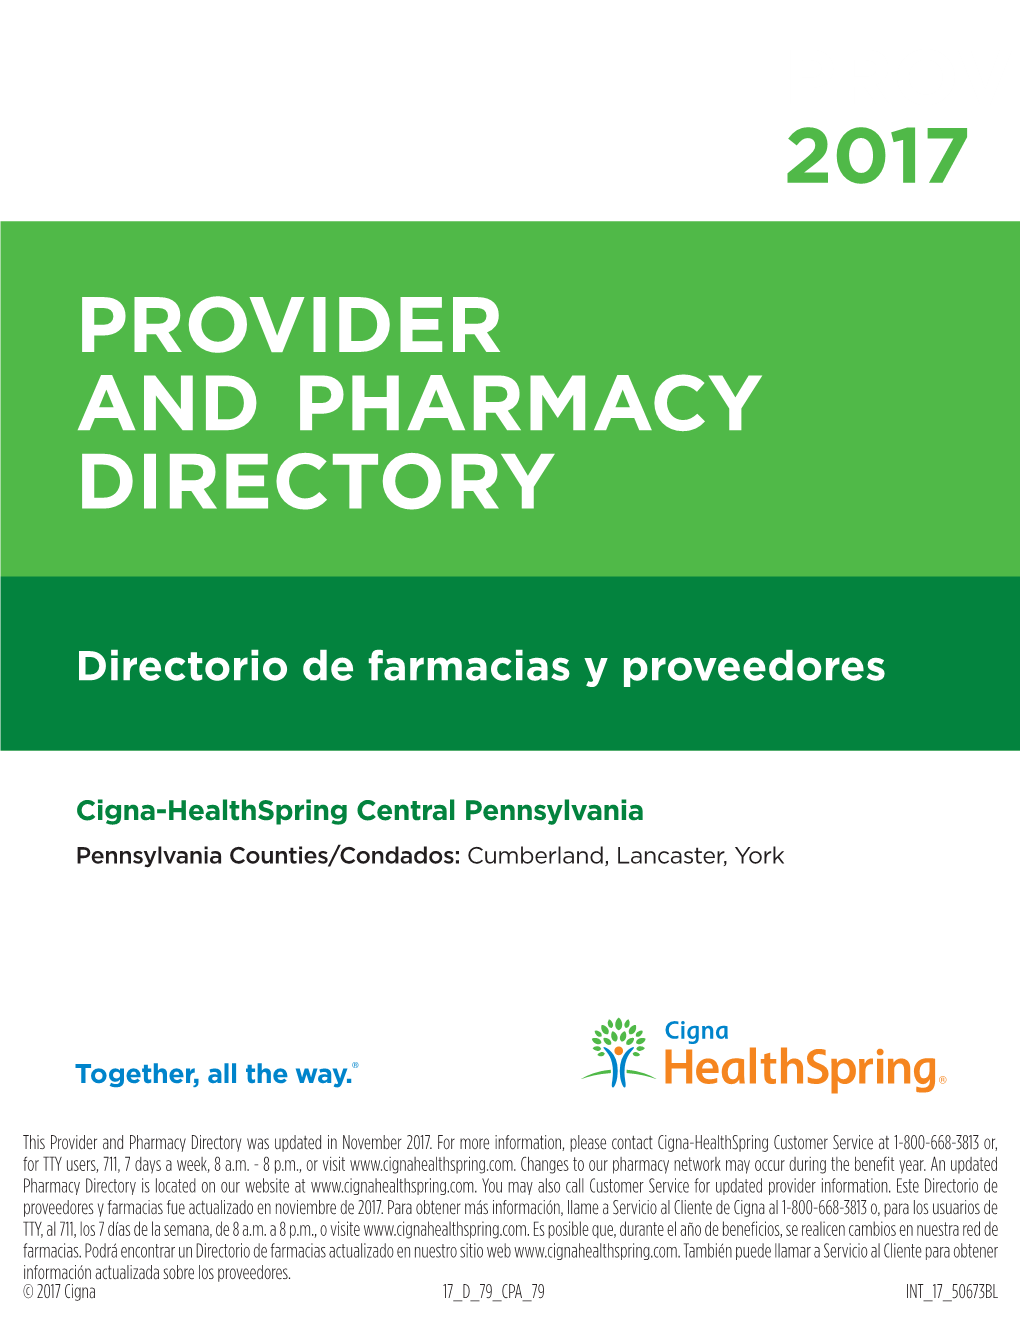 Provider and Pharmacy Directory Provider 2017